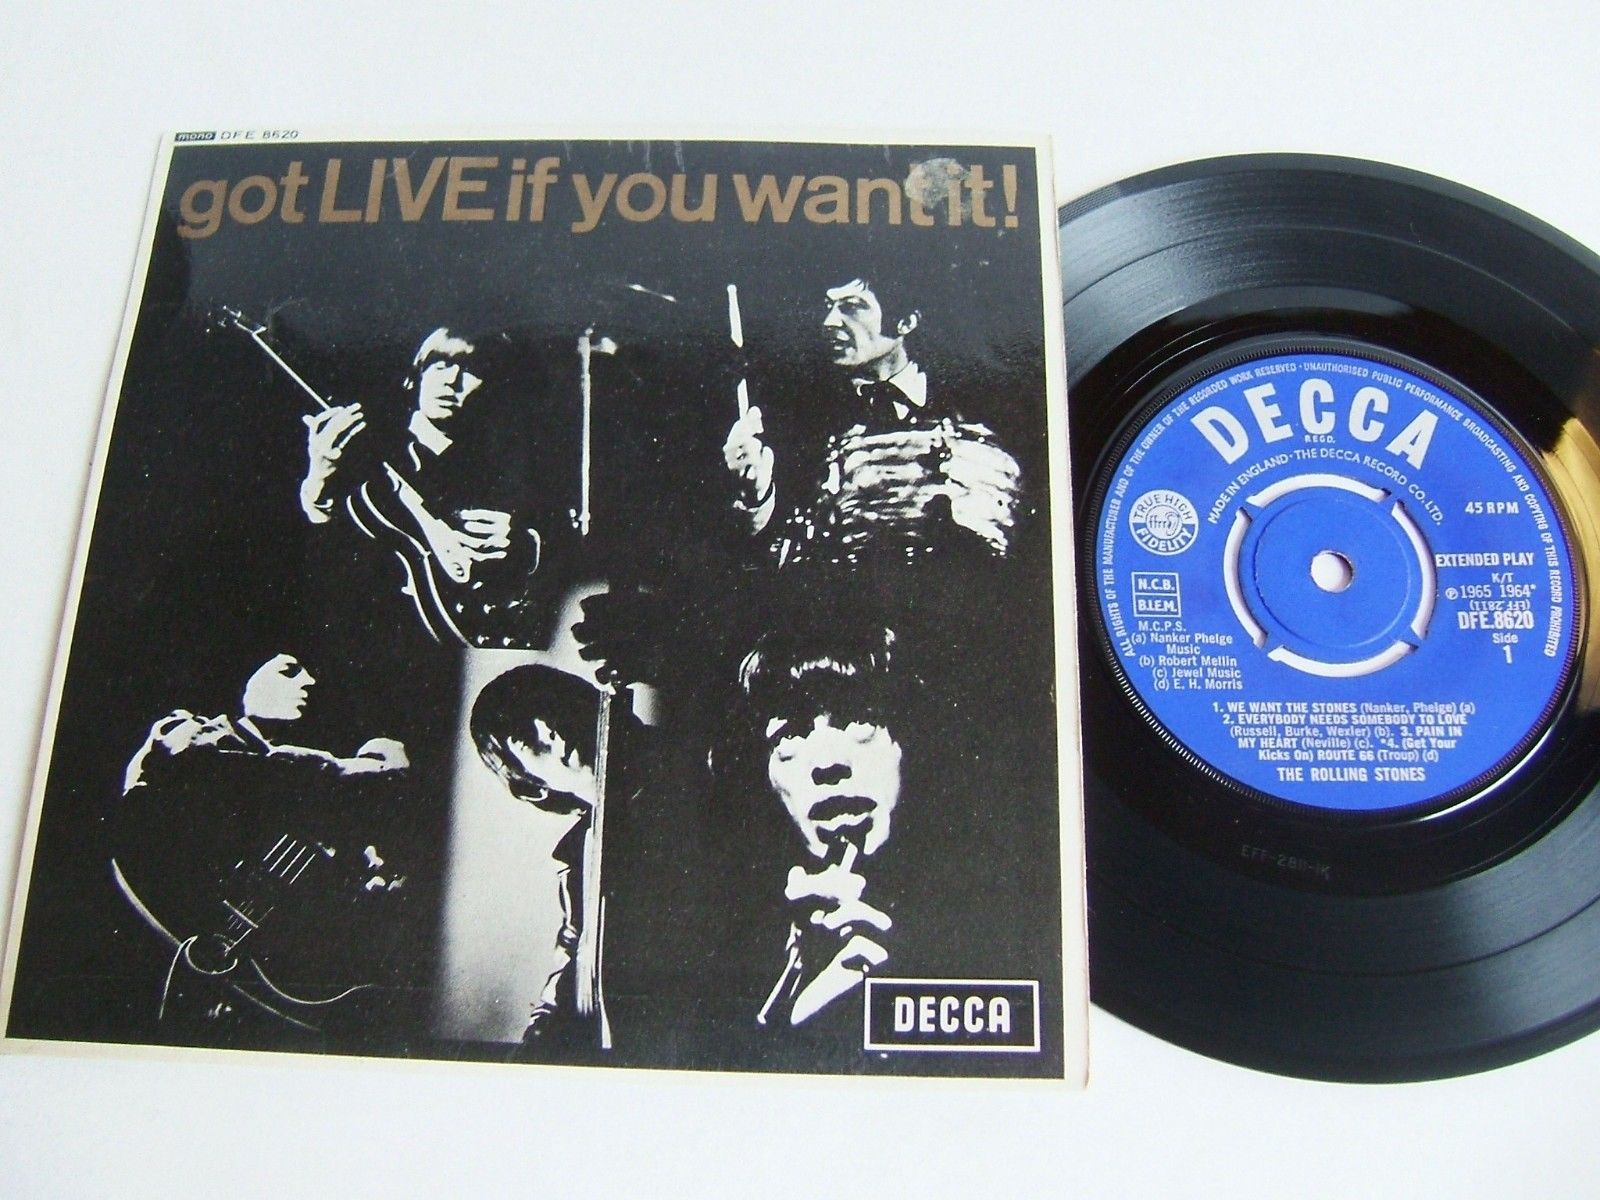 popsike.com - The Rolling Stones - Got Live If You Want It EP DFE 8620 UK  7" 1stP 1965 PS EX - auction details